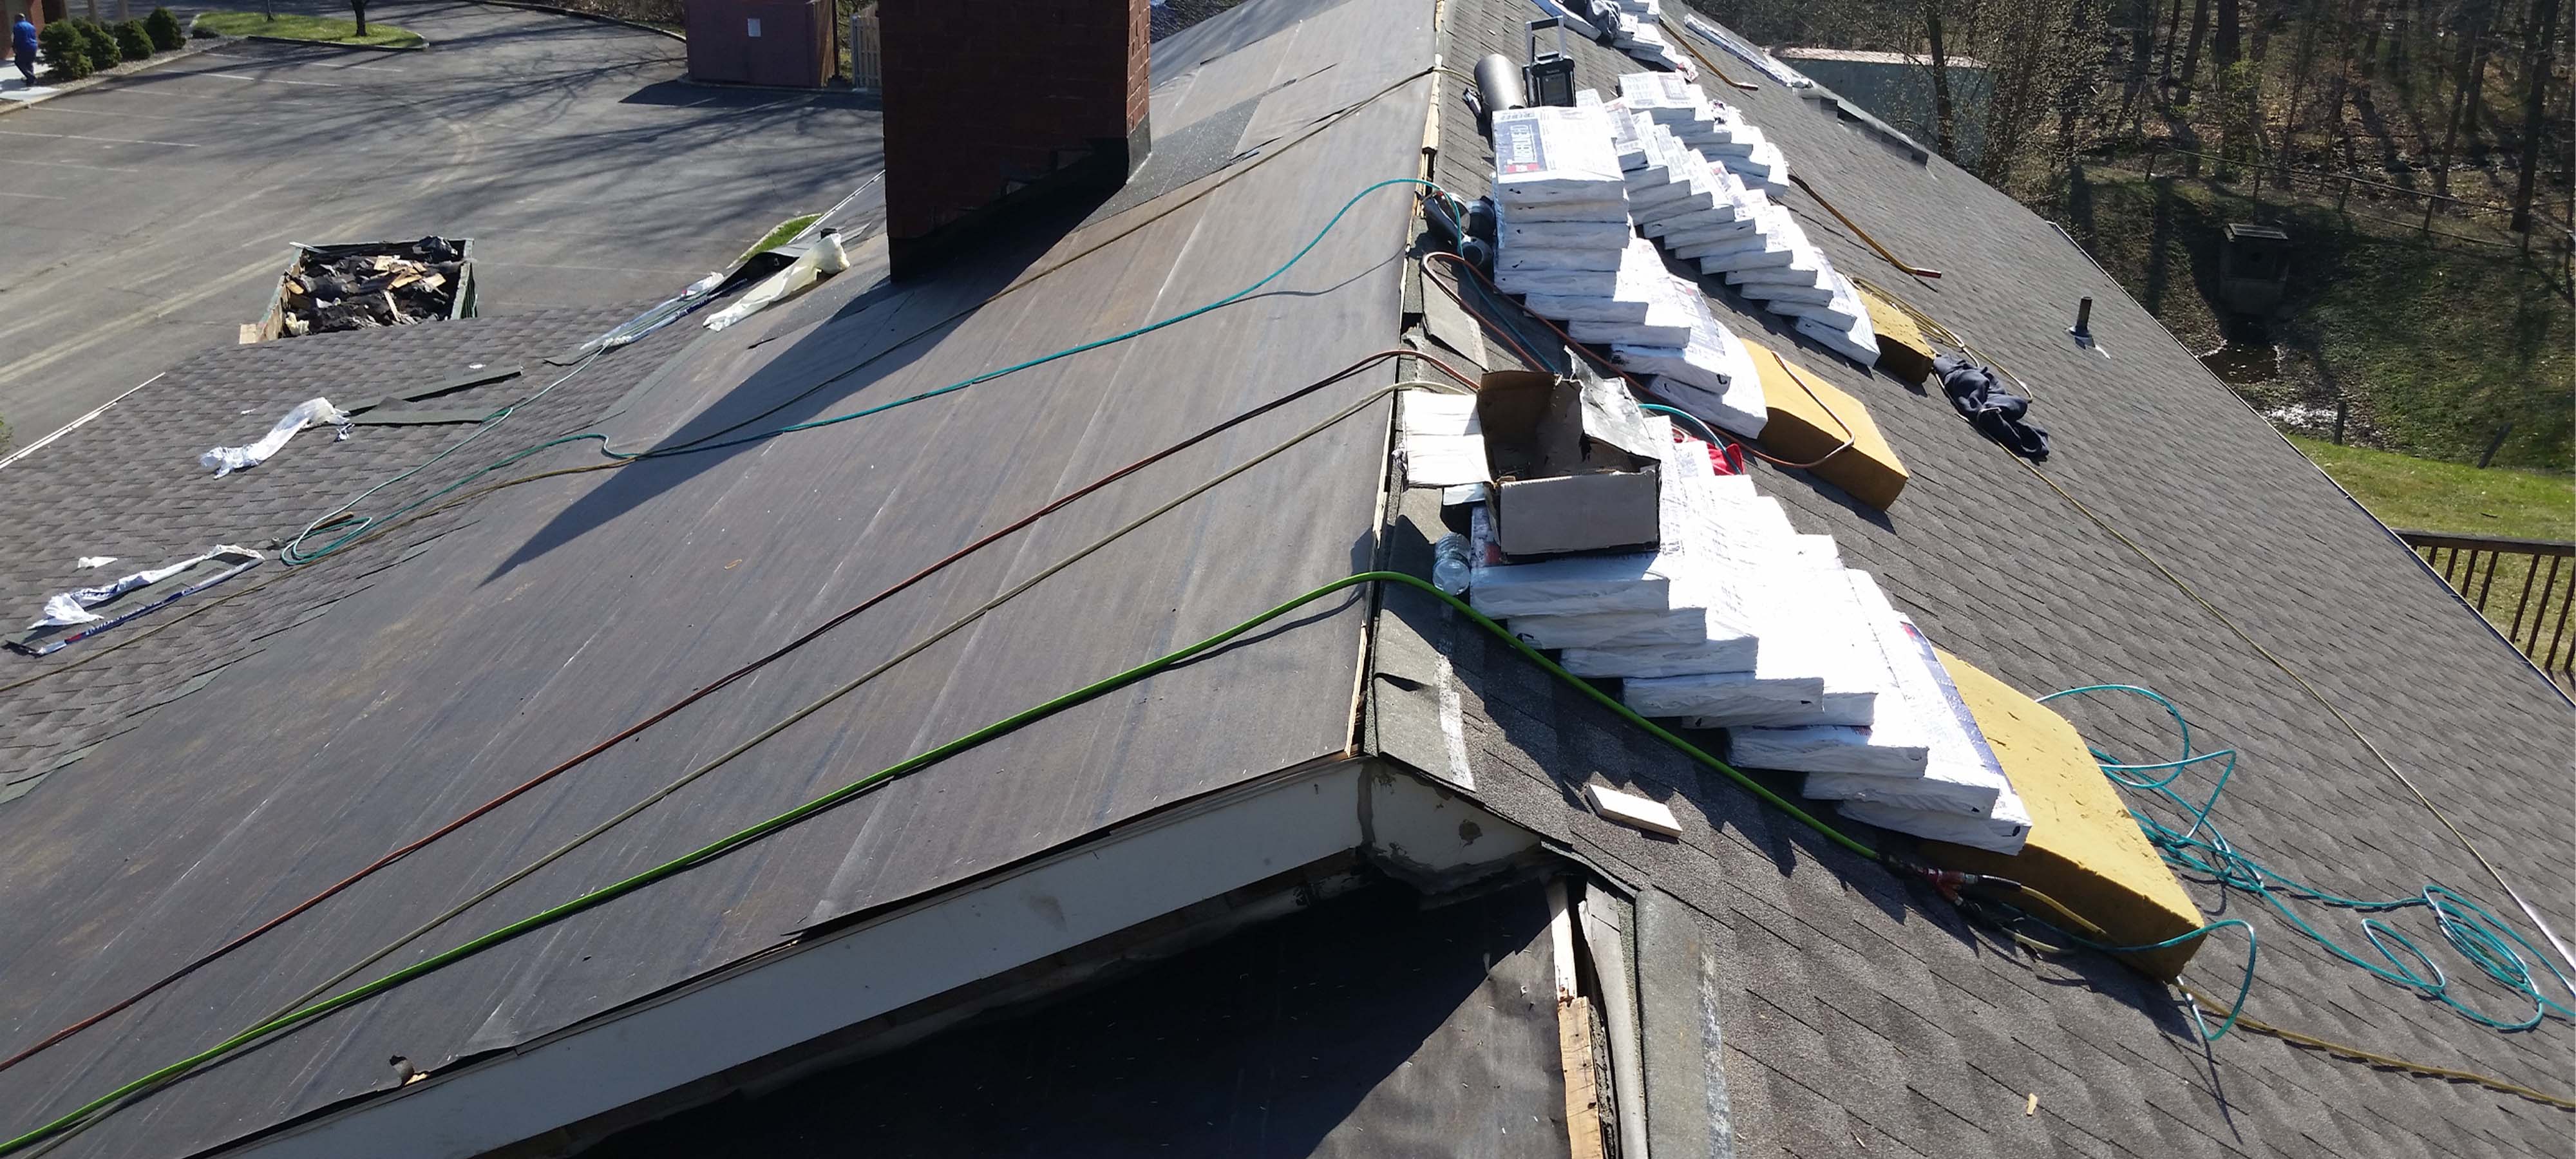 Quality Roof Installation & Replacement Services In Langhorne, PA